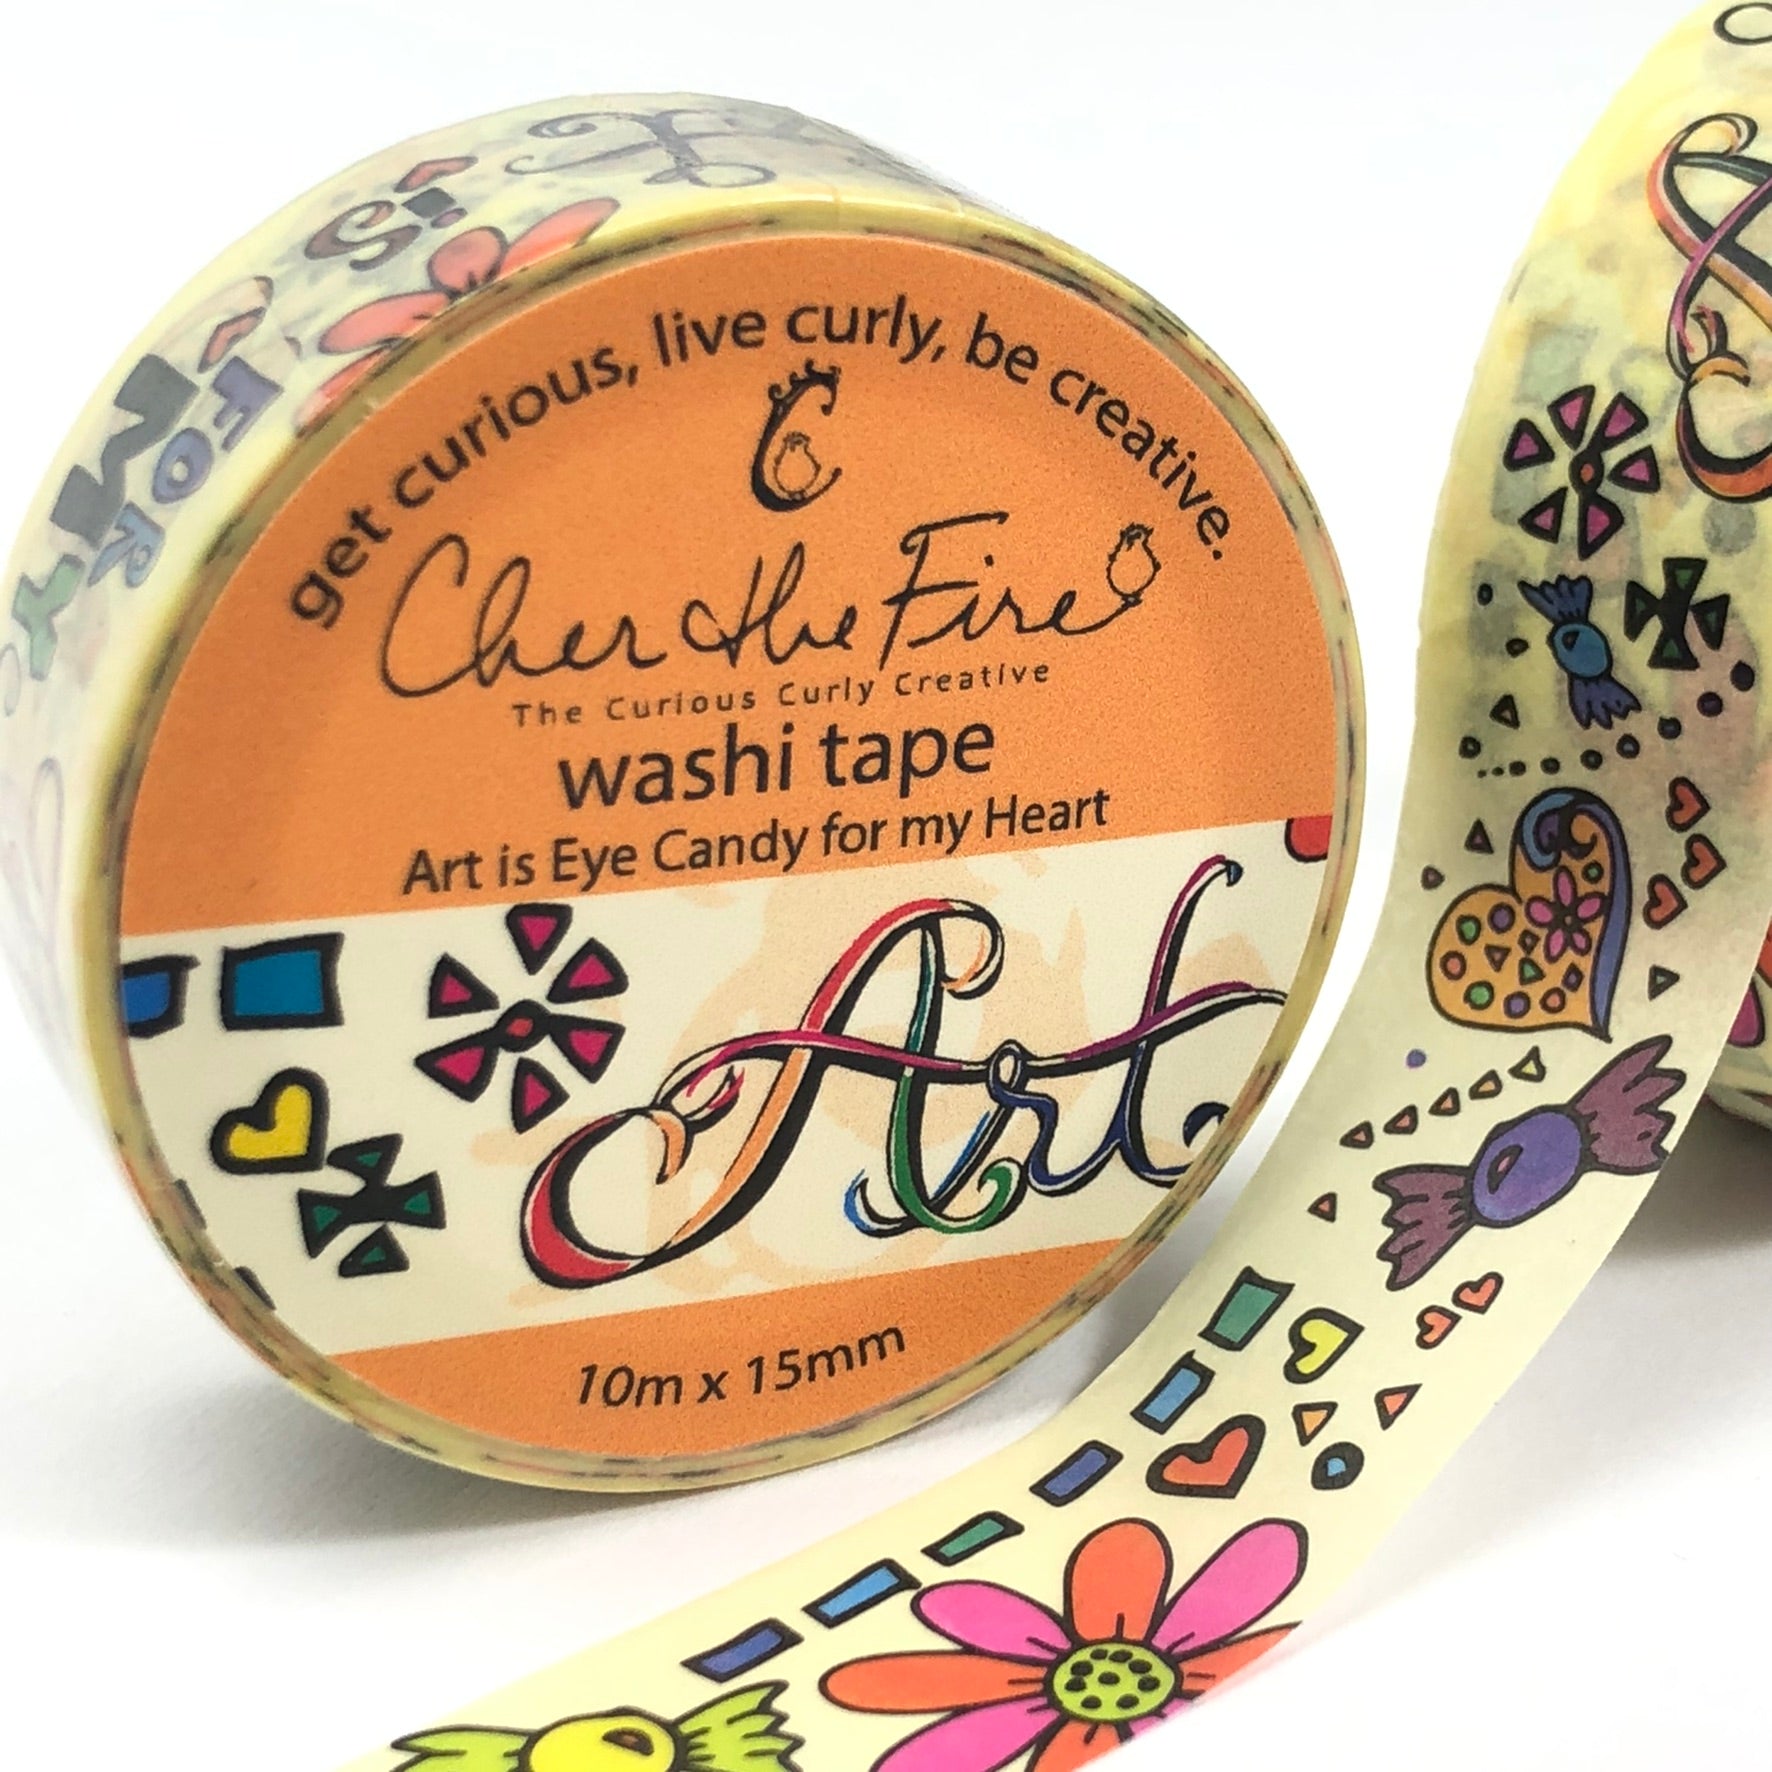 Washi Tape - Art is Eye Candy for my Heart, 15mm